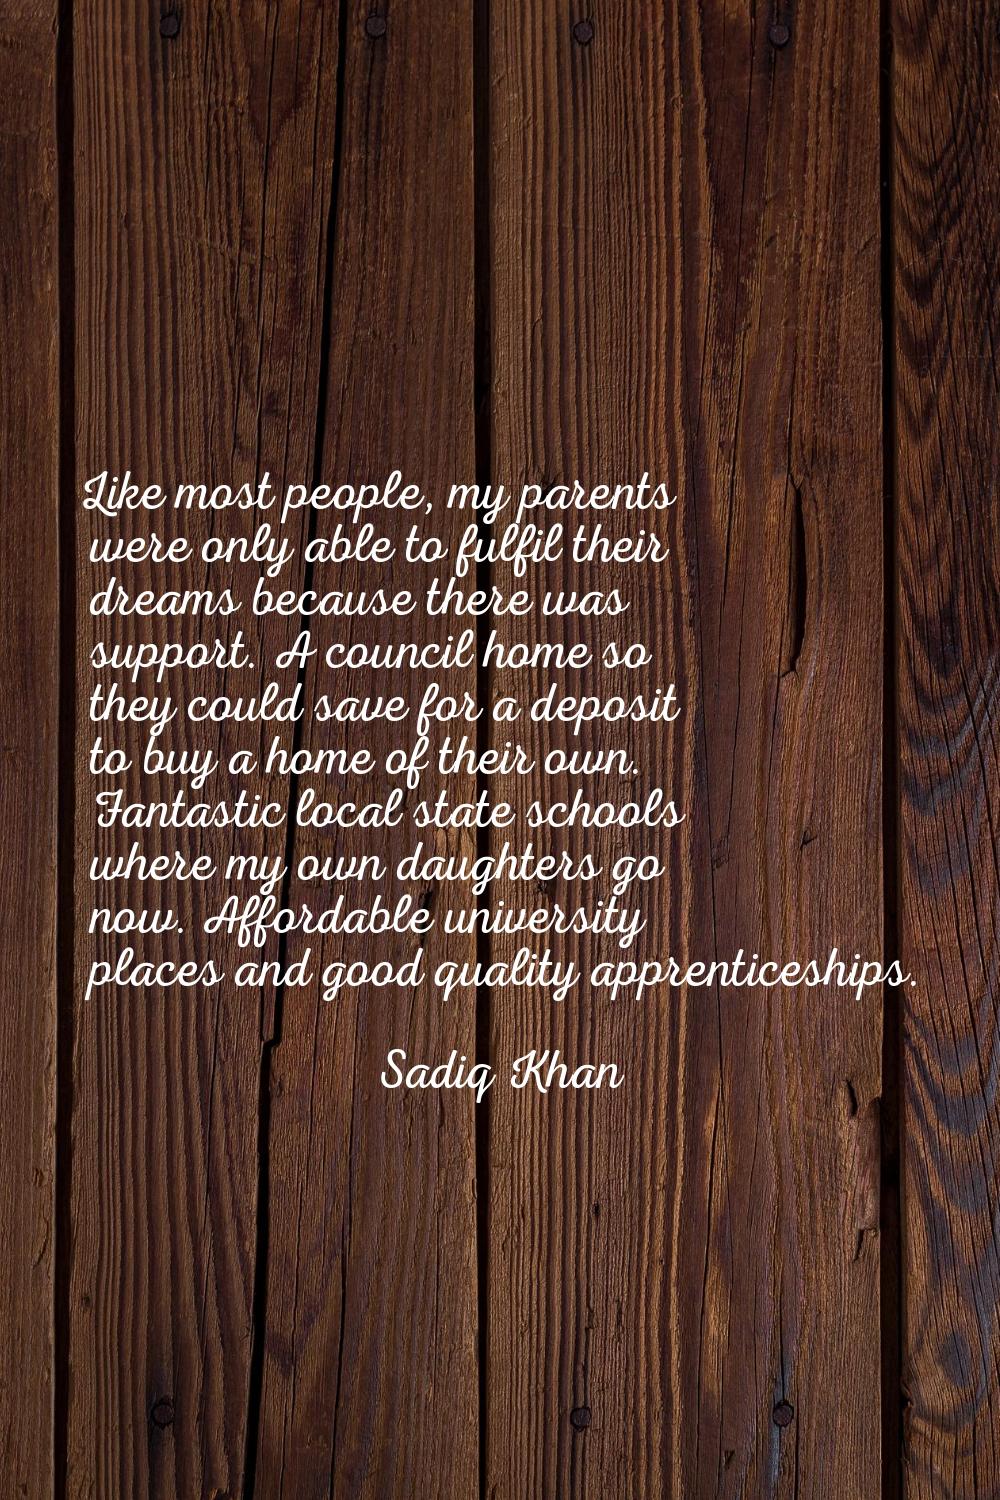 Like most people, my parents were only able to fulfil their dreams because there was support. A cou